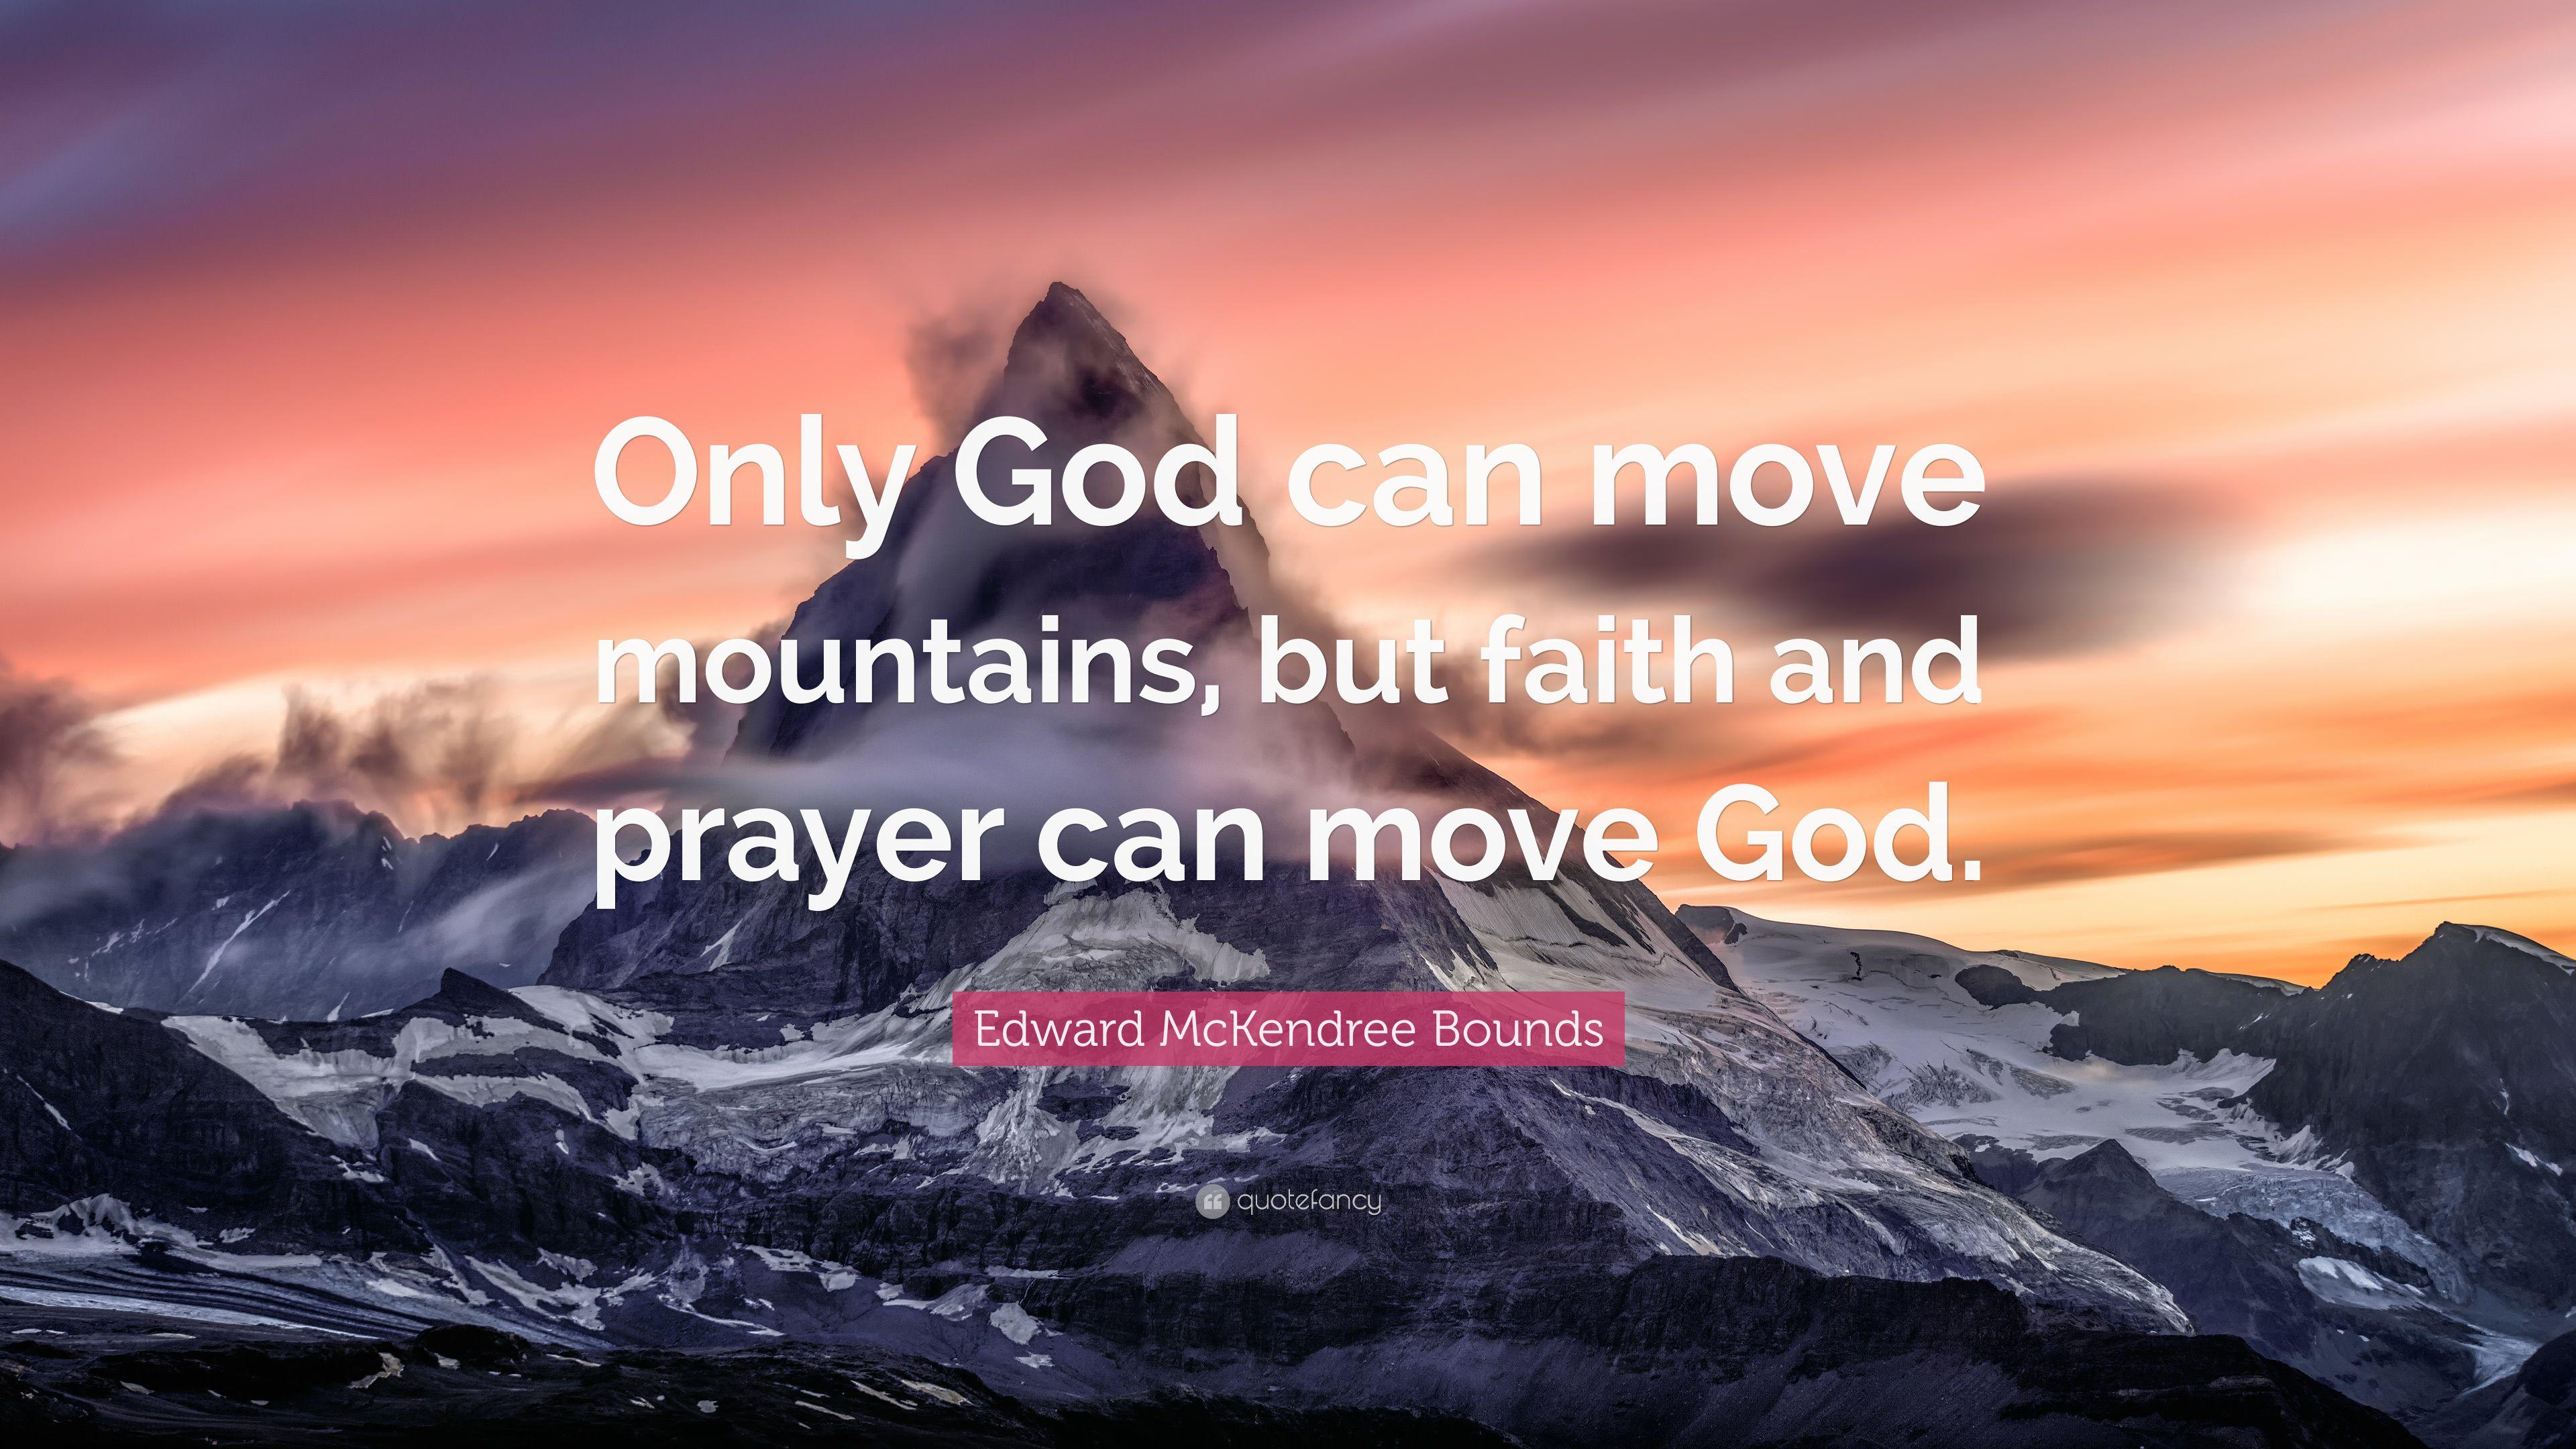 Edward McKendree Bounds Quote: “Only God can move mountains, but